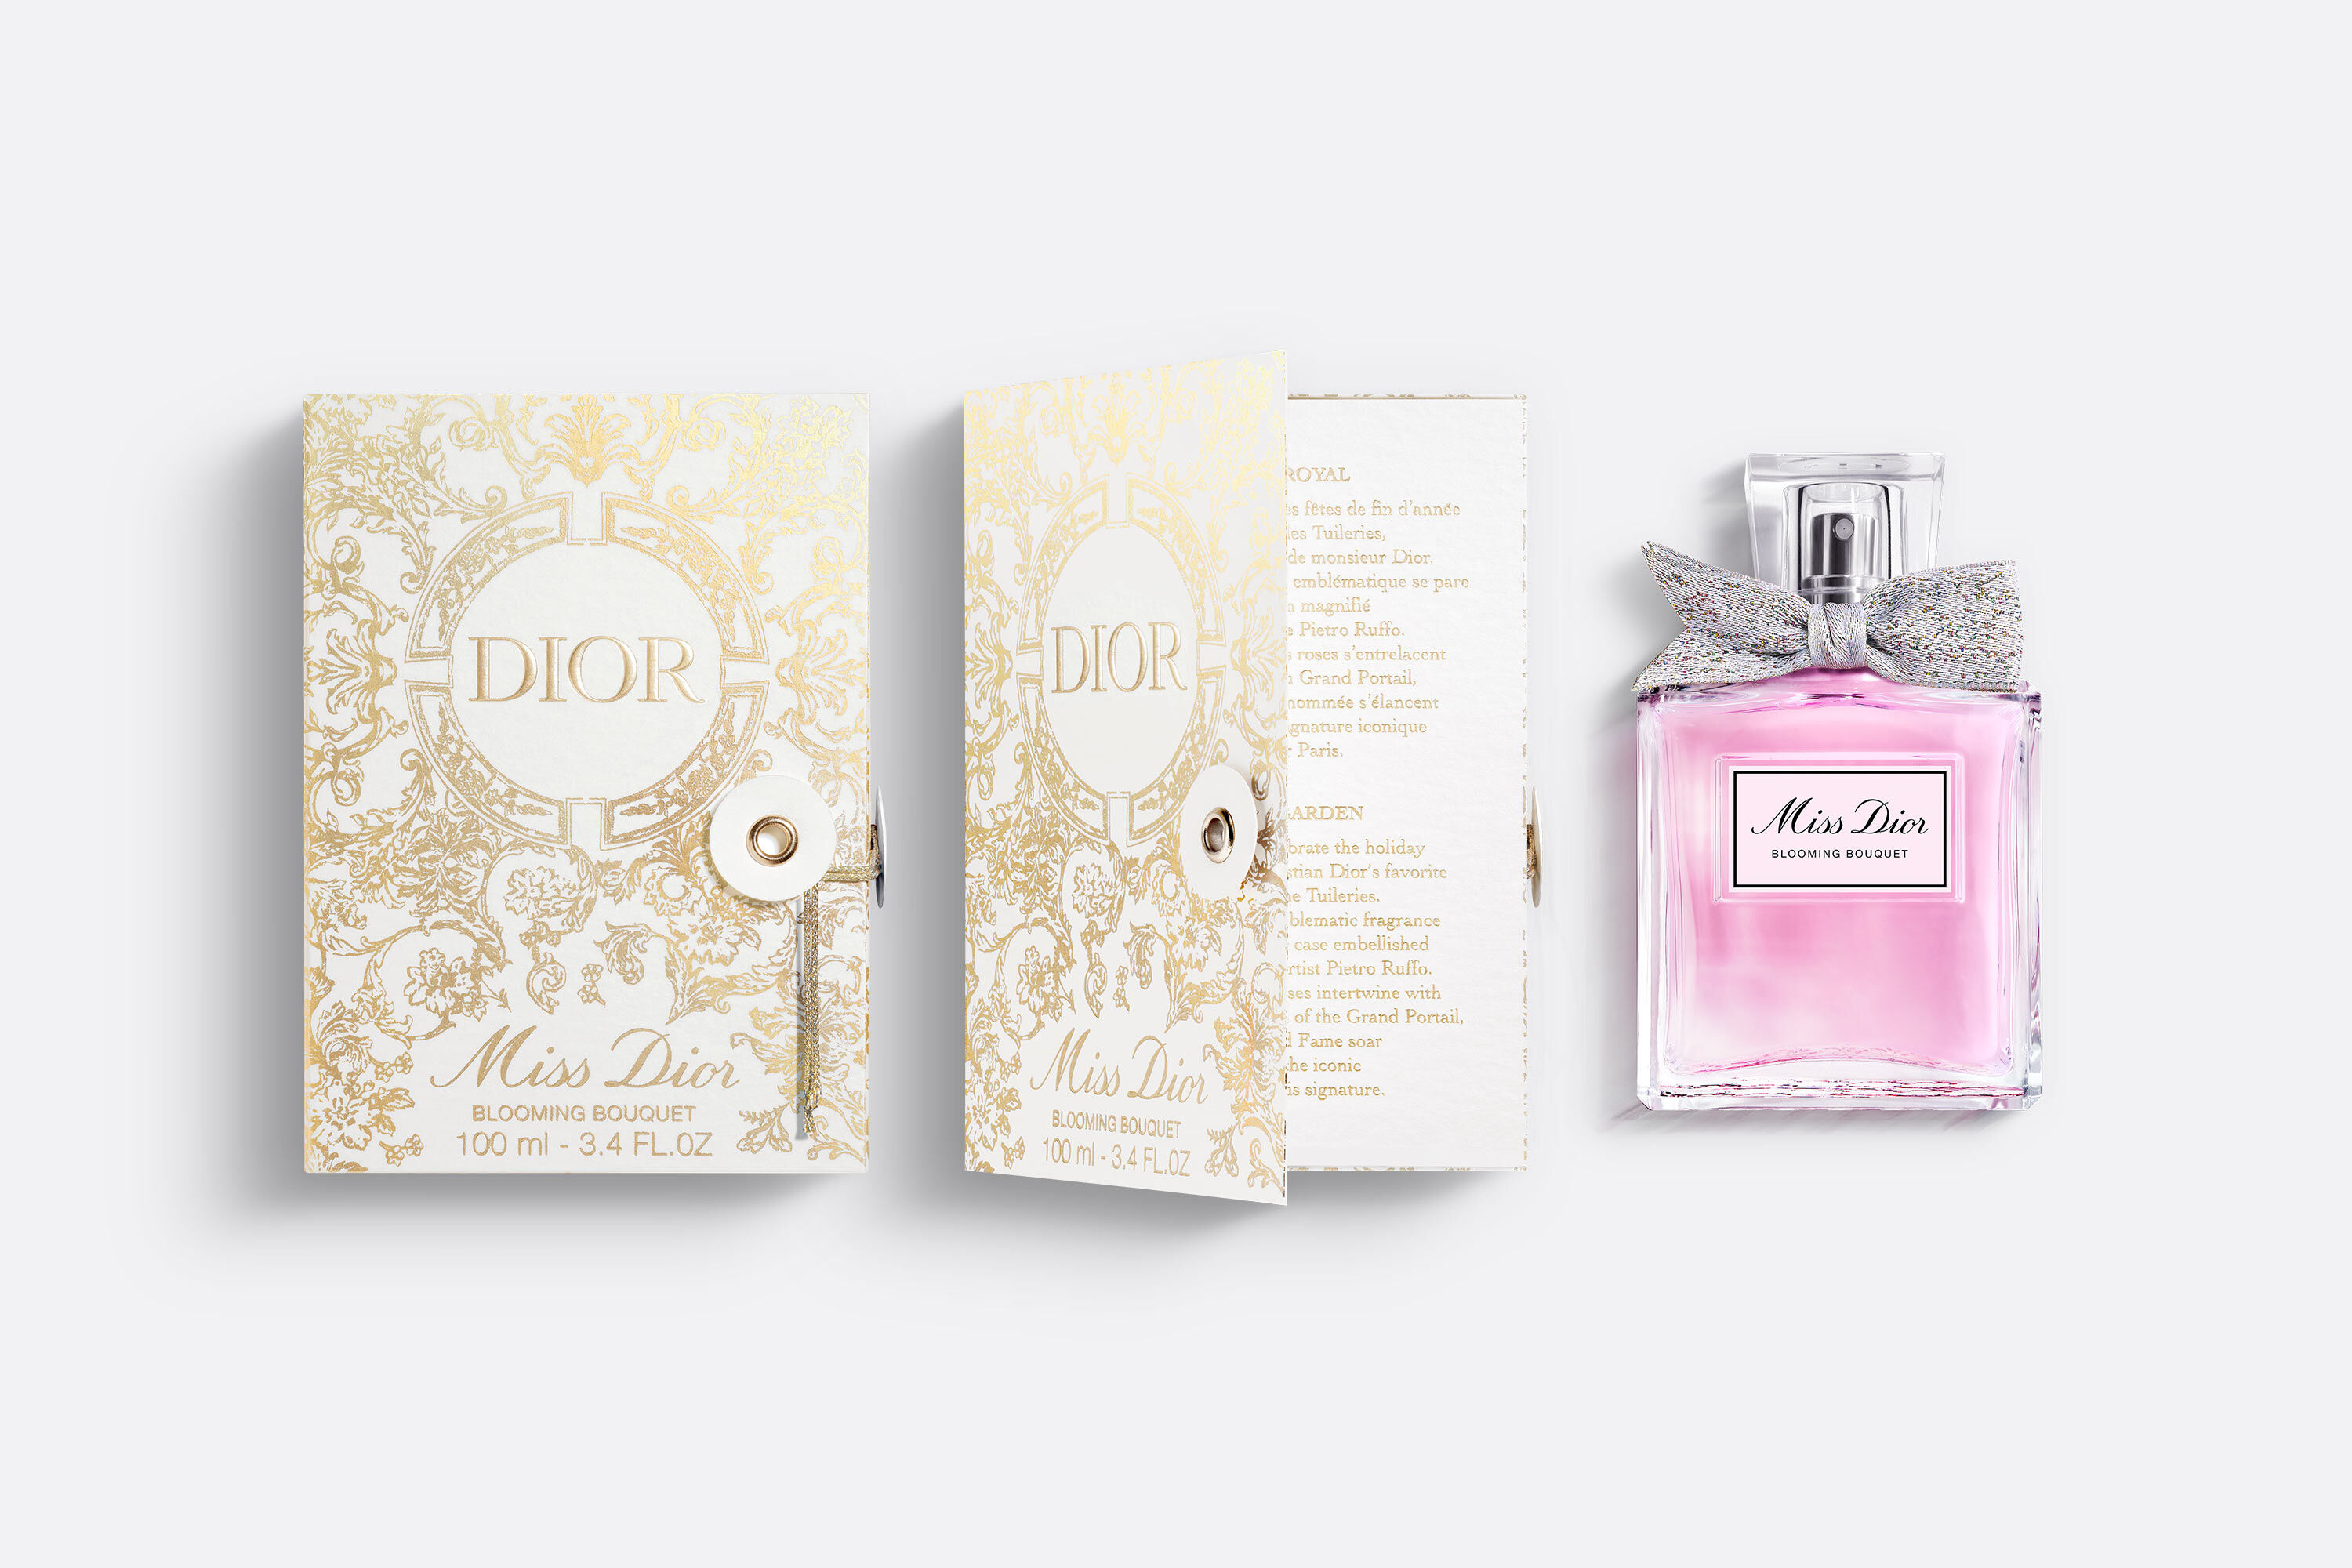 Miss Dior Blooming Bouquet: Limited-Edition Gift Case